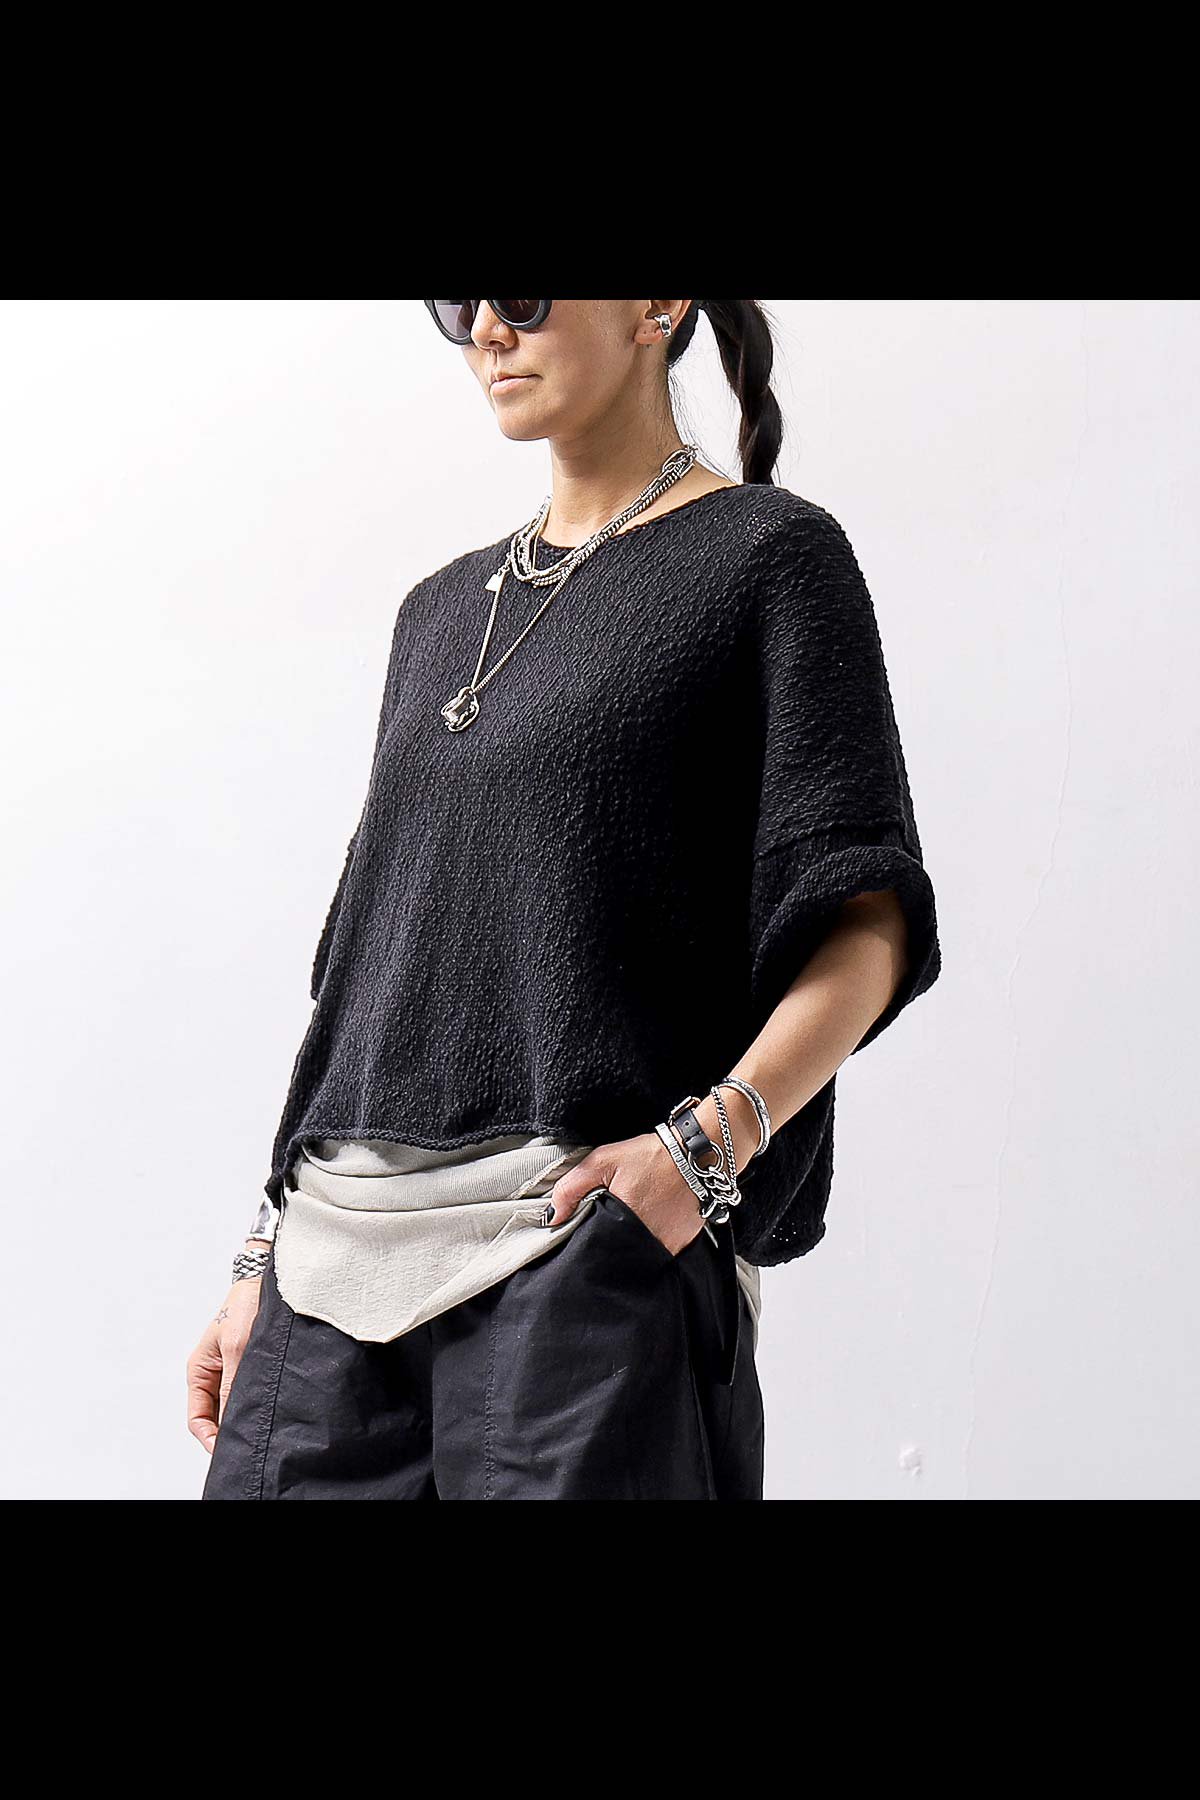 <img class='new_mark_img1' src='https://img.shop-pro.jp/img/new/icons8.gif' style='border:none;display:inline;margin:0px;padding:0px;width:auto;' />UNISEX COTTON LINEN KNIT HALF-SLEEVE TOP BZB1636_BLACK